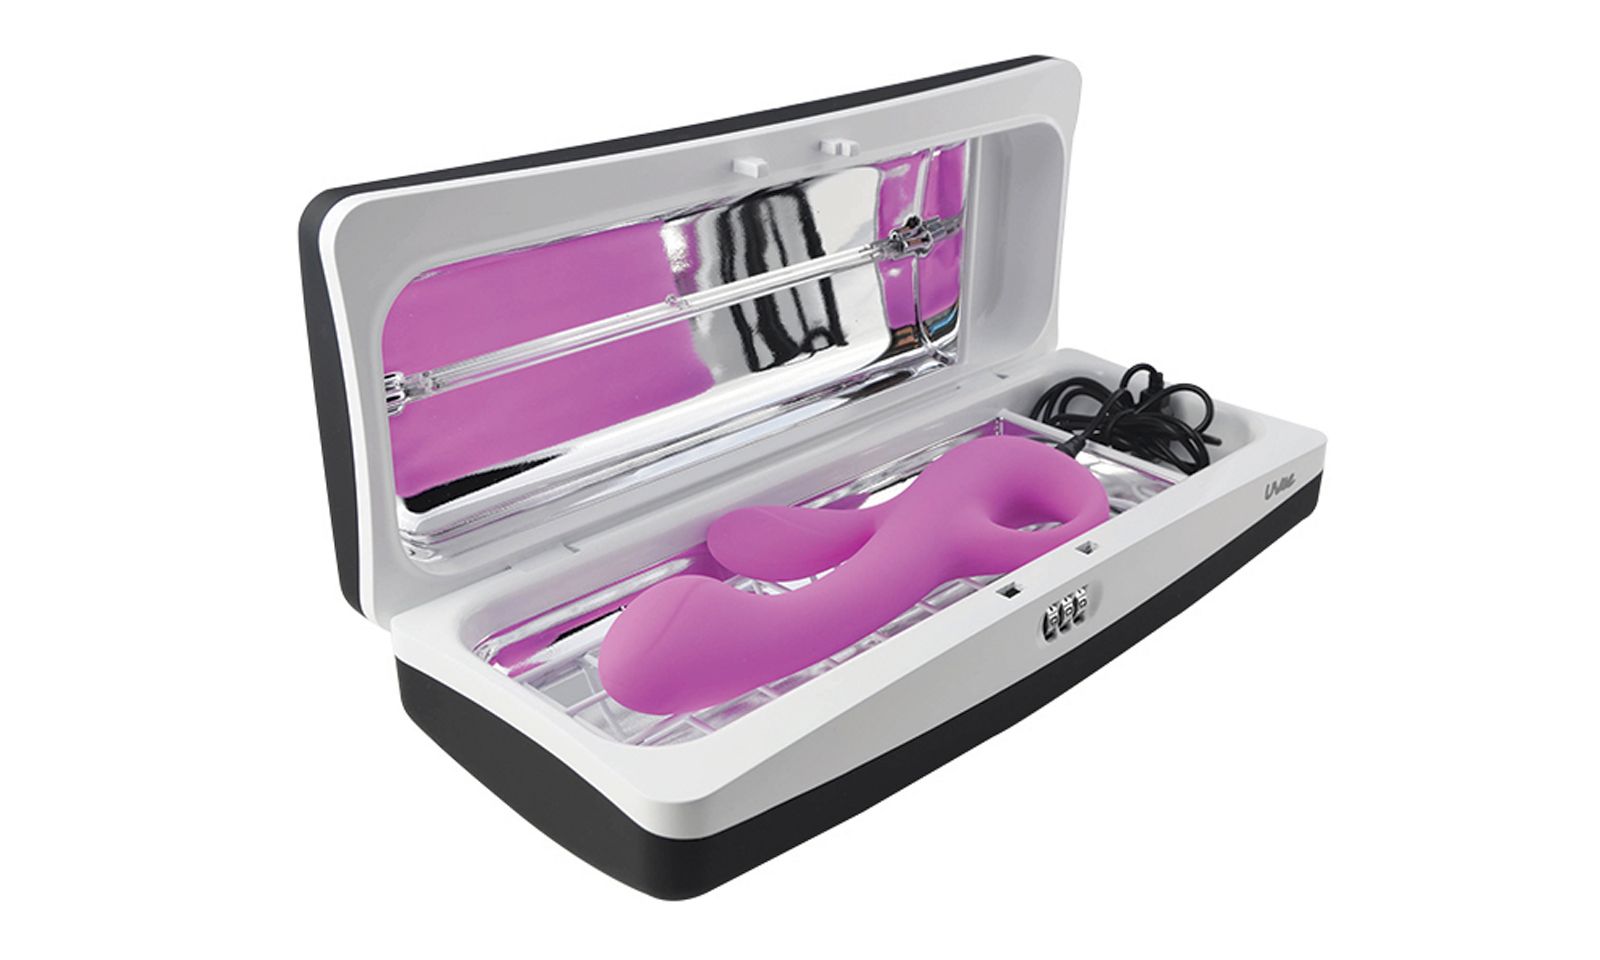 UVee Sex Toy Sanitizing, Storage System Shipping from Entrenue